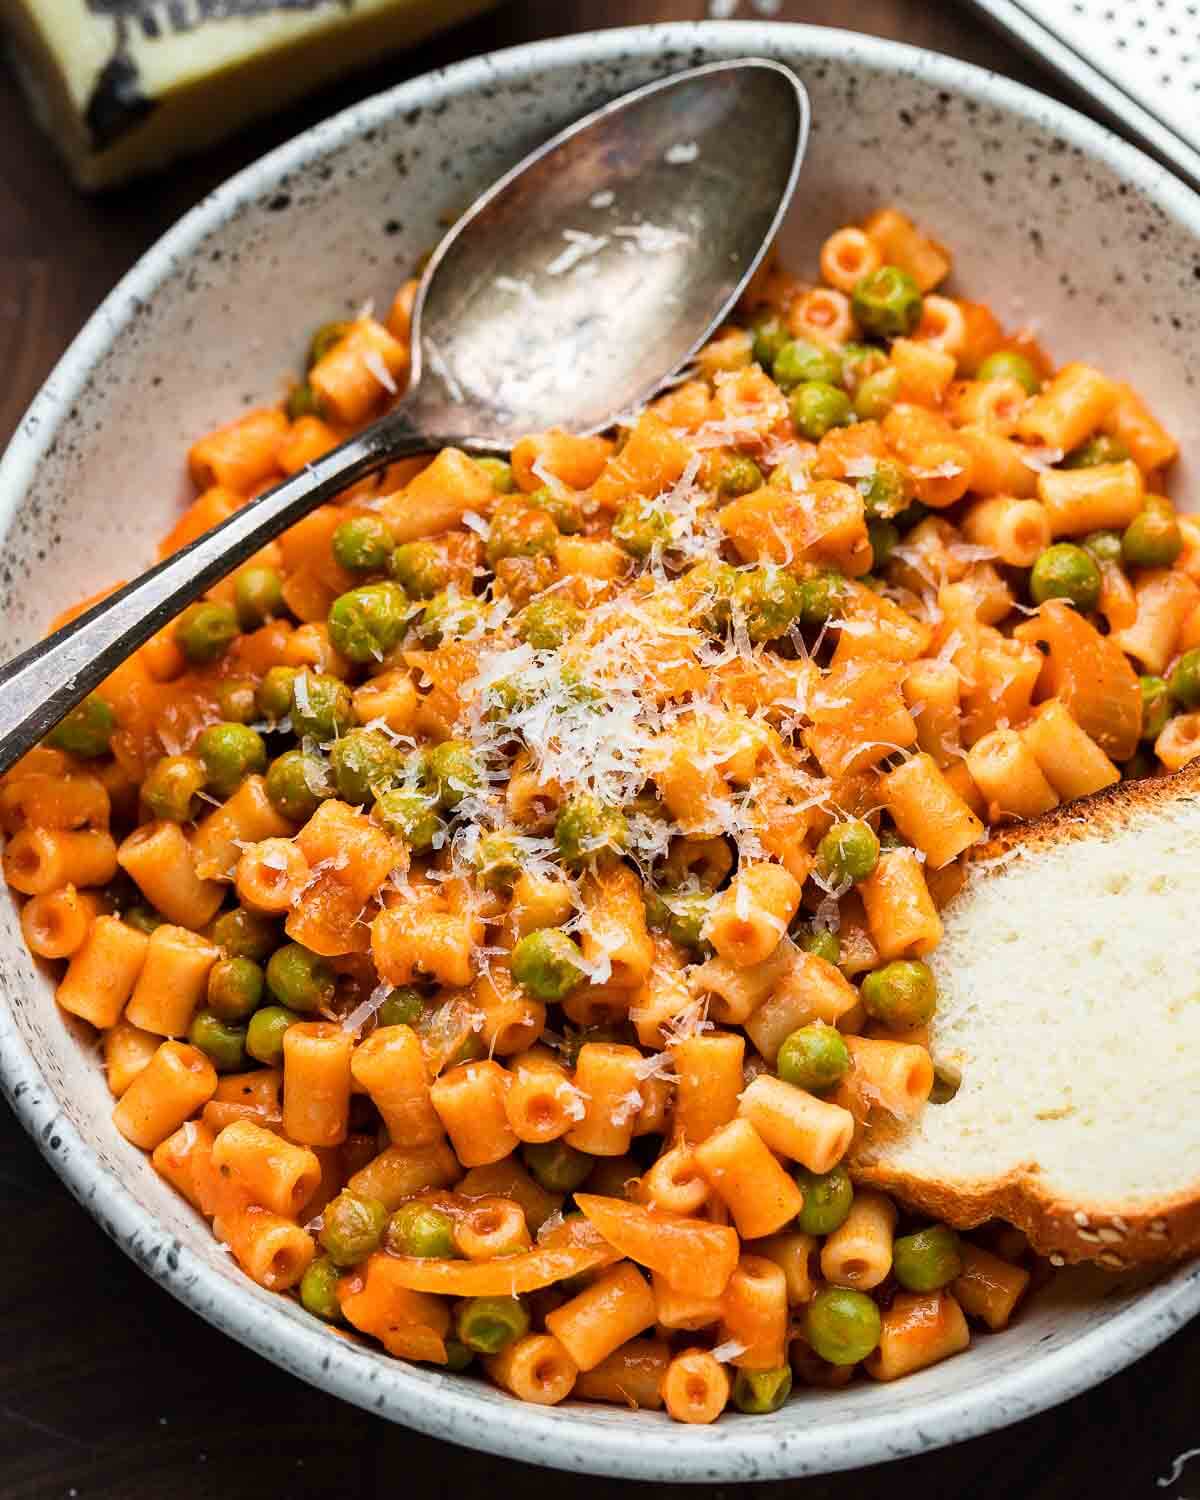 Pasta and peas in red sauce in white bowl with large spoon and piece of bread.